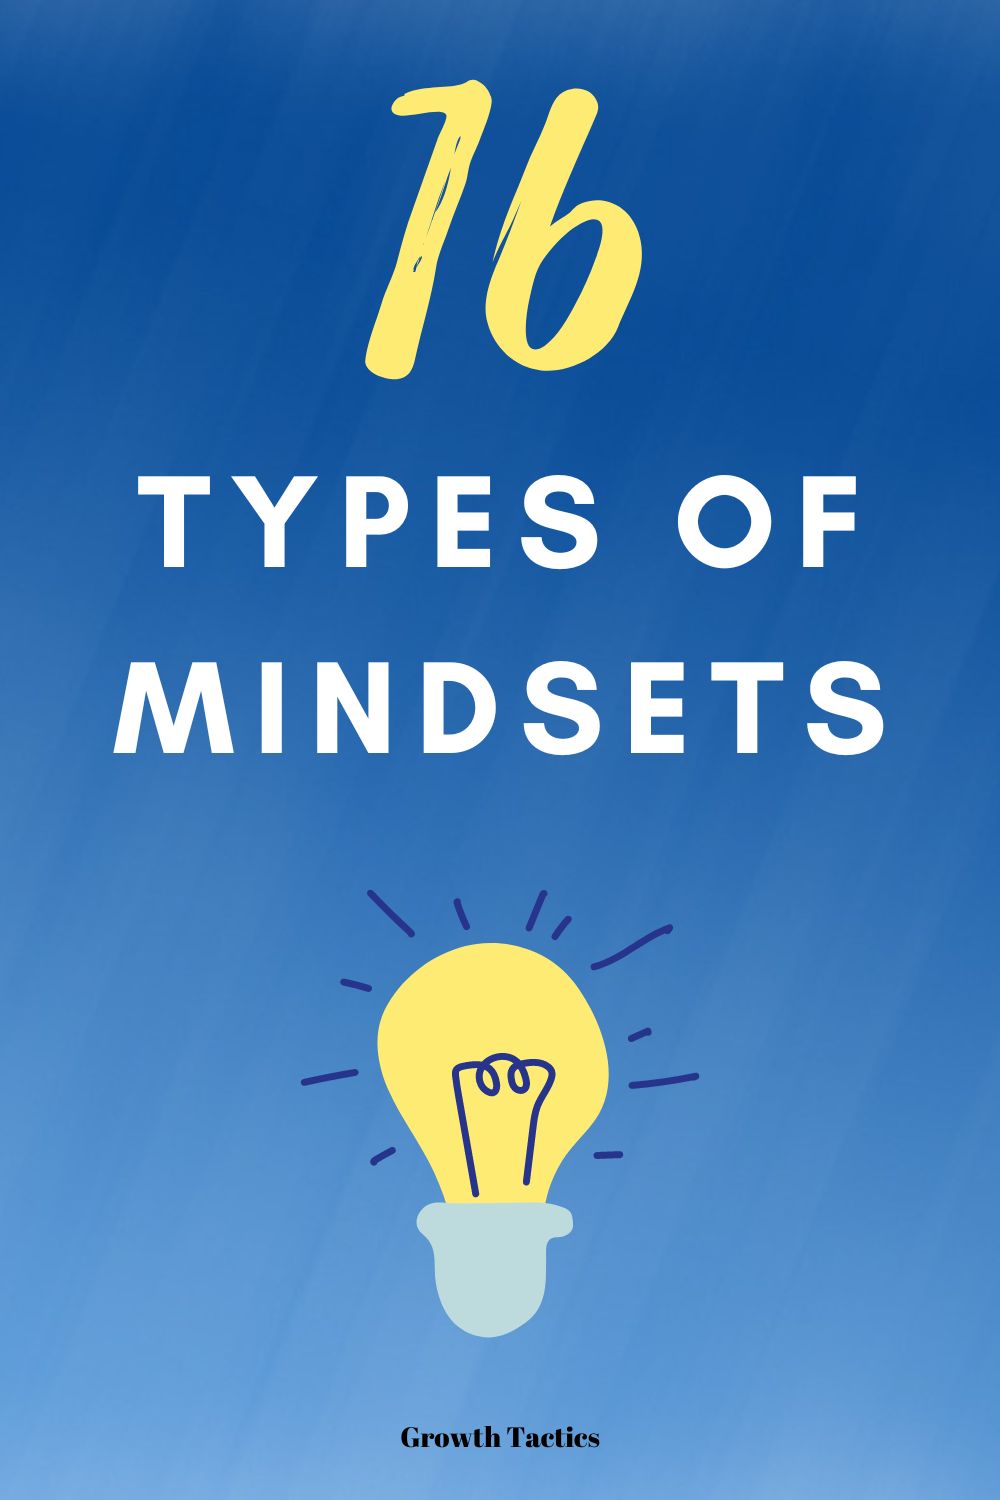 16 Types of Mindsets for Greater Success